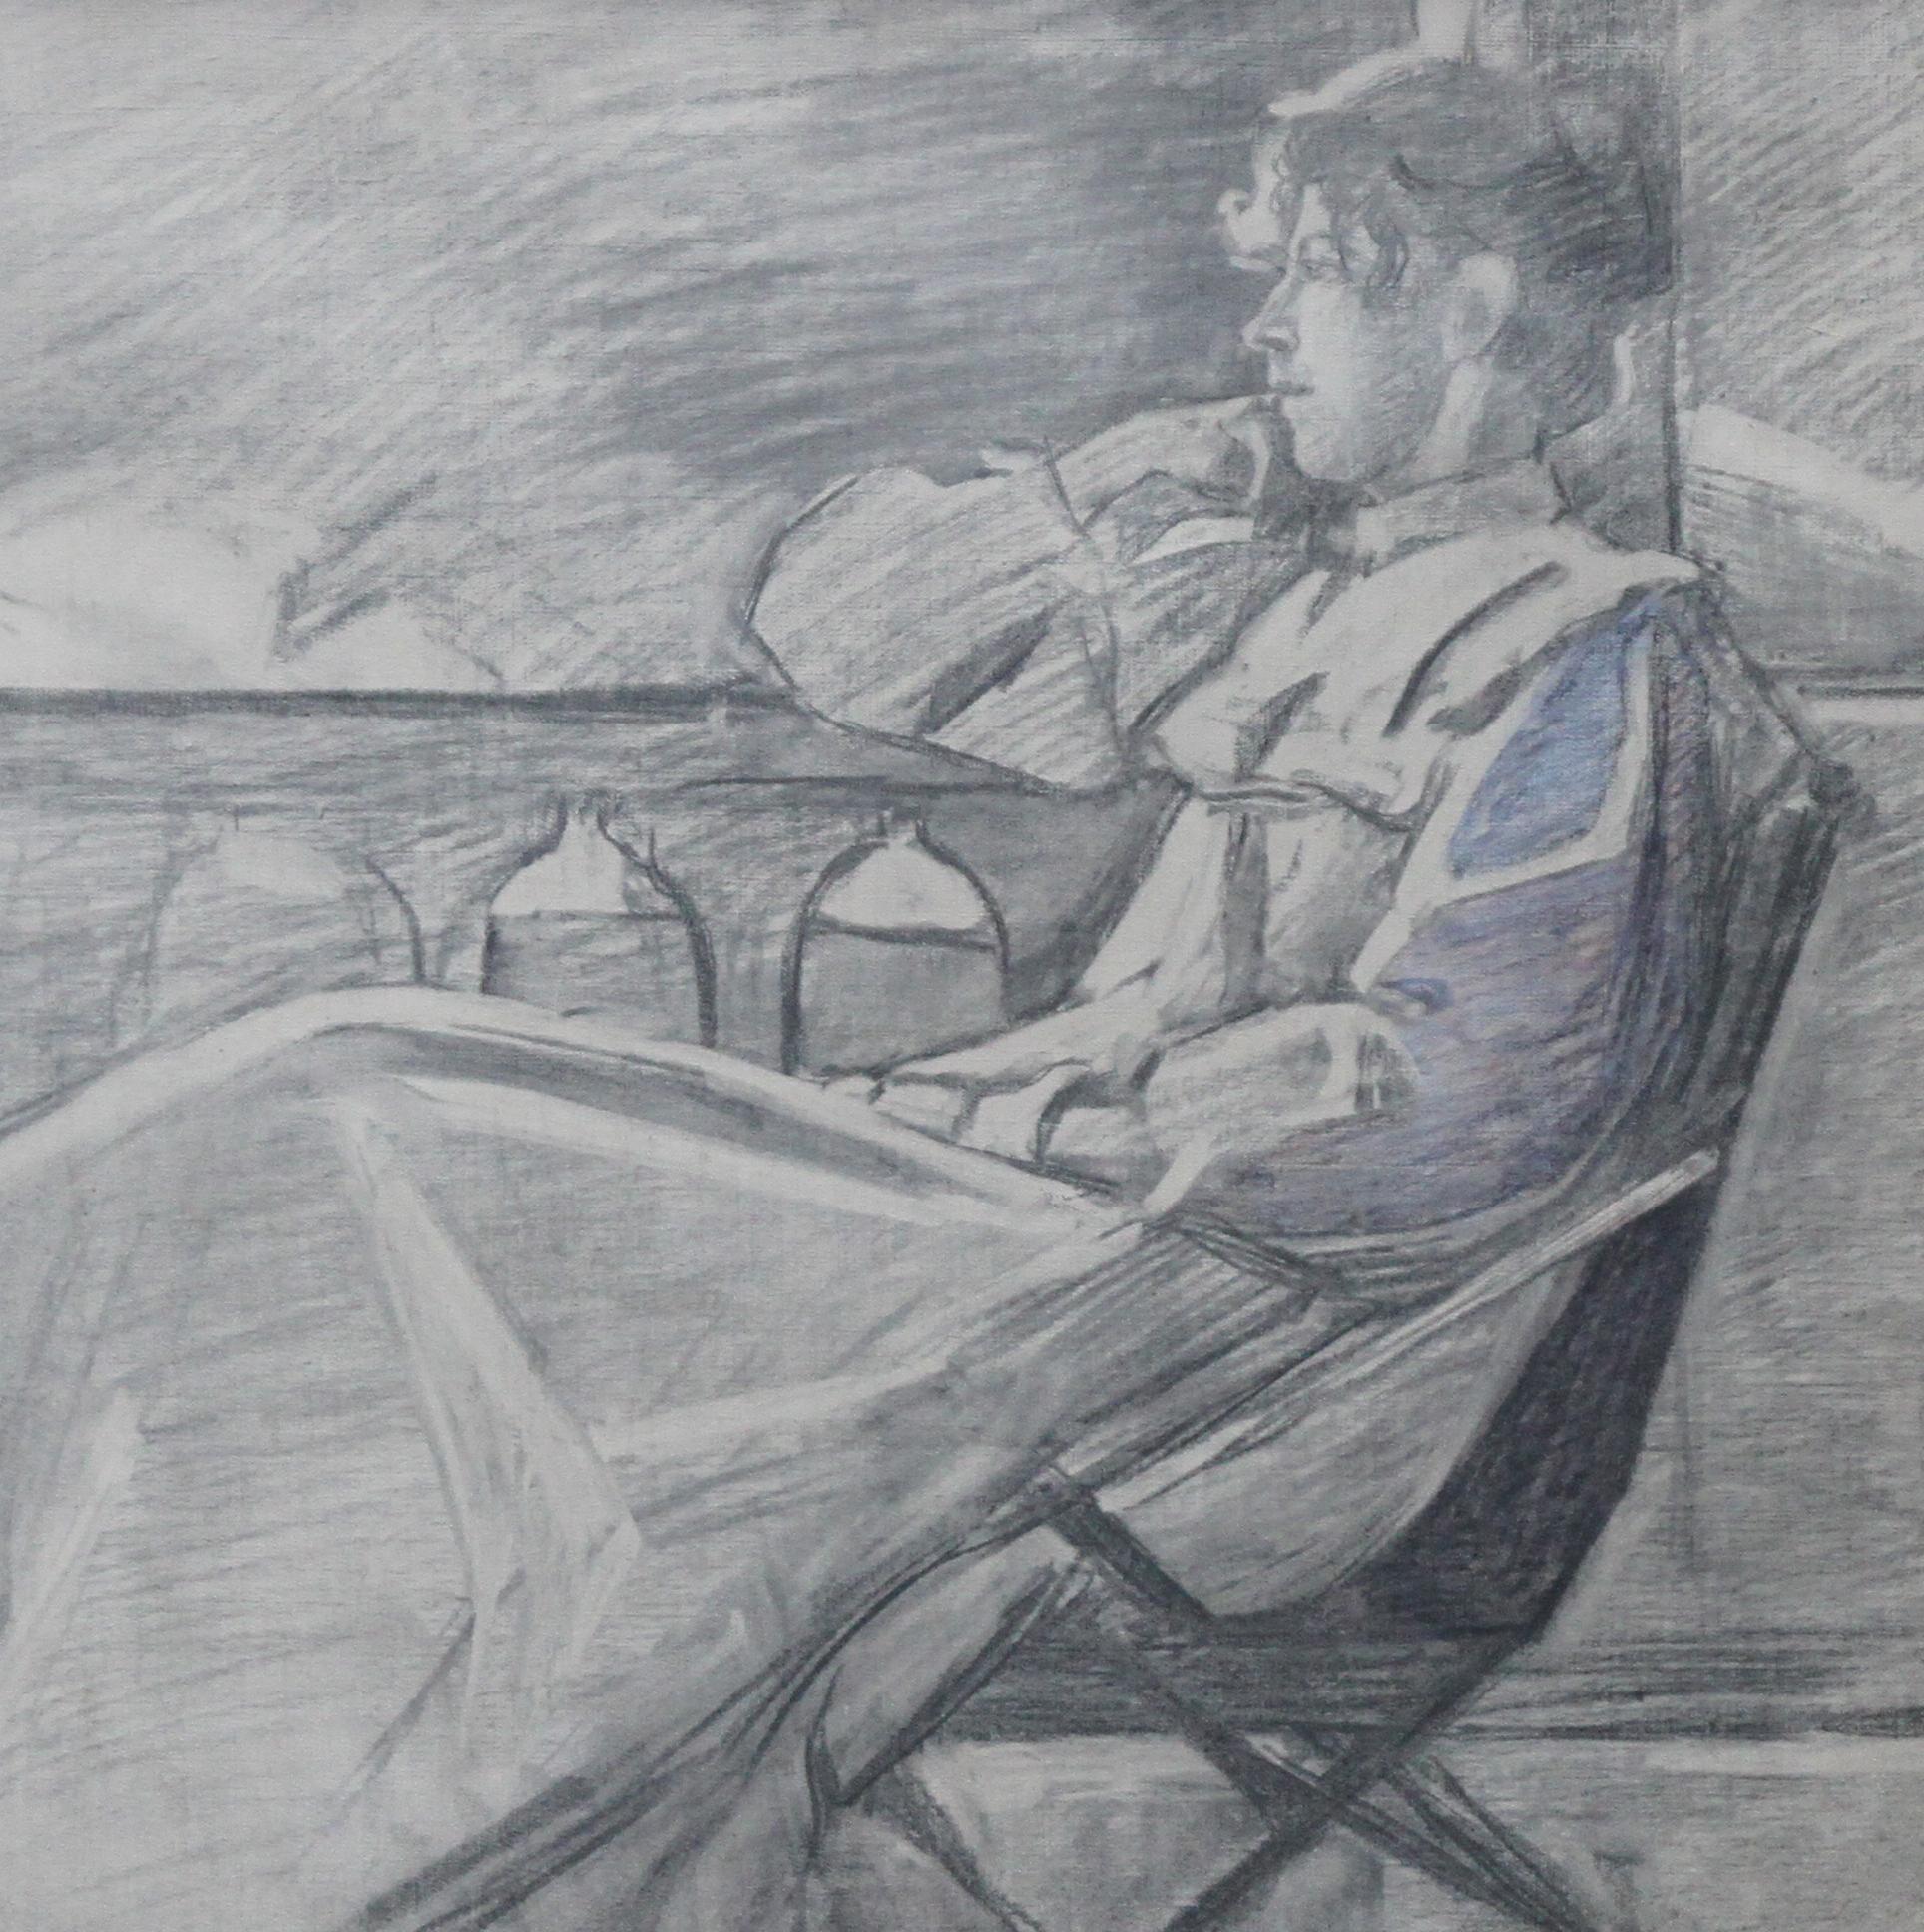 This lovely pencil and charcoal drawing is attributed to circle of French noted artist Jacques Joseph Tissot. Created around 1880 the drawing is of a woman relaxing on a reclining chair outdoors, lost in contemplation or admiring the view. There is